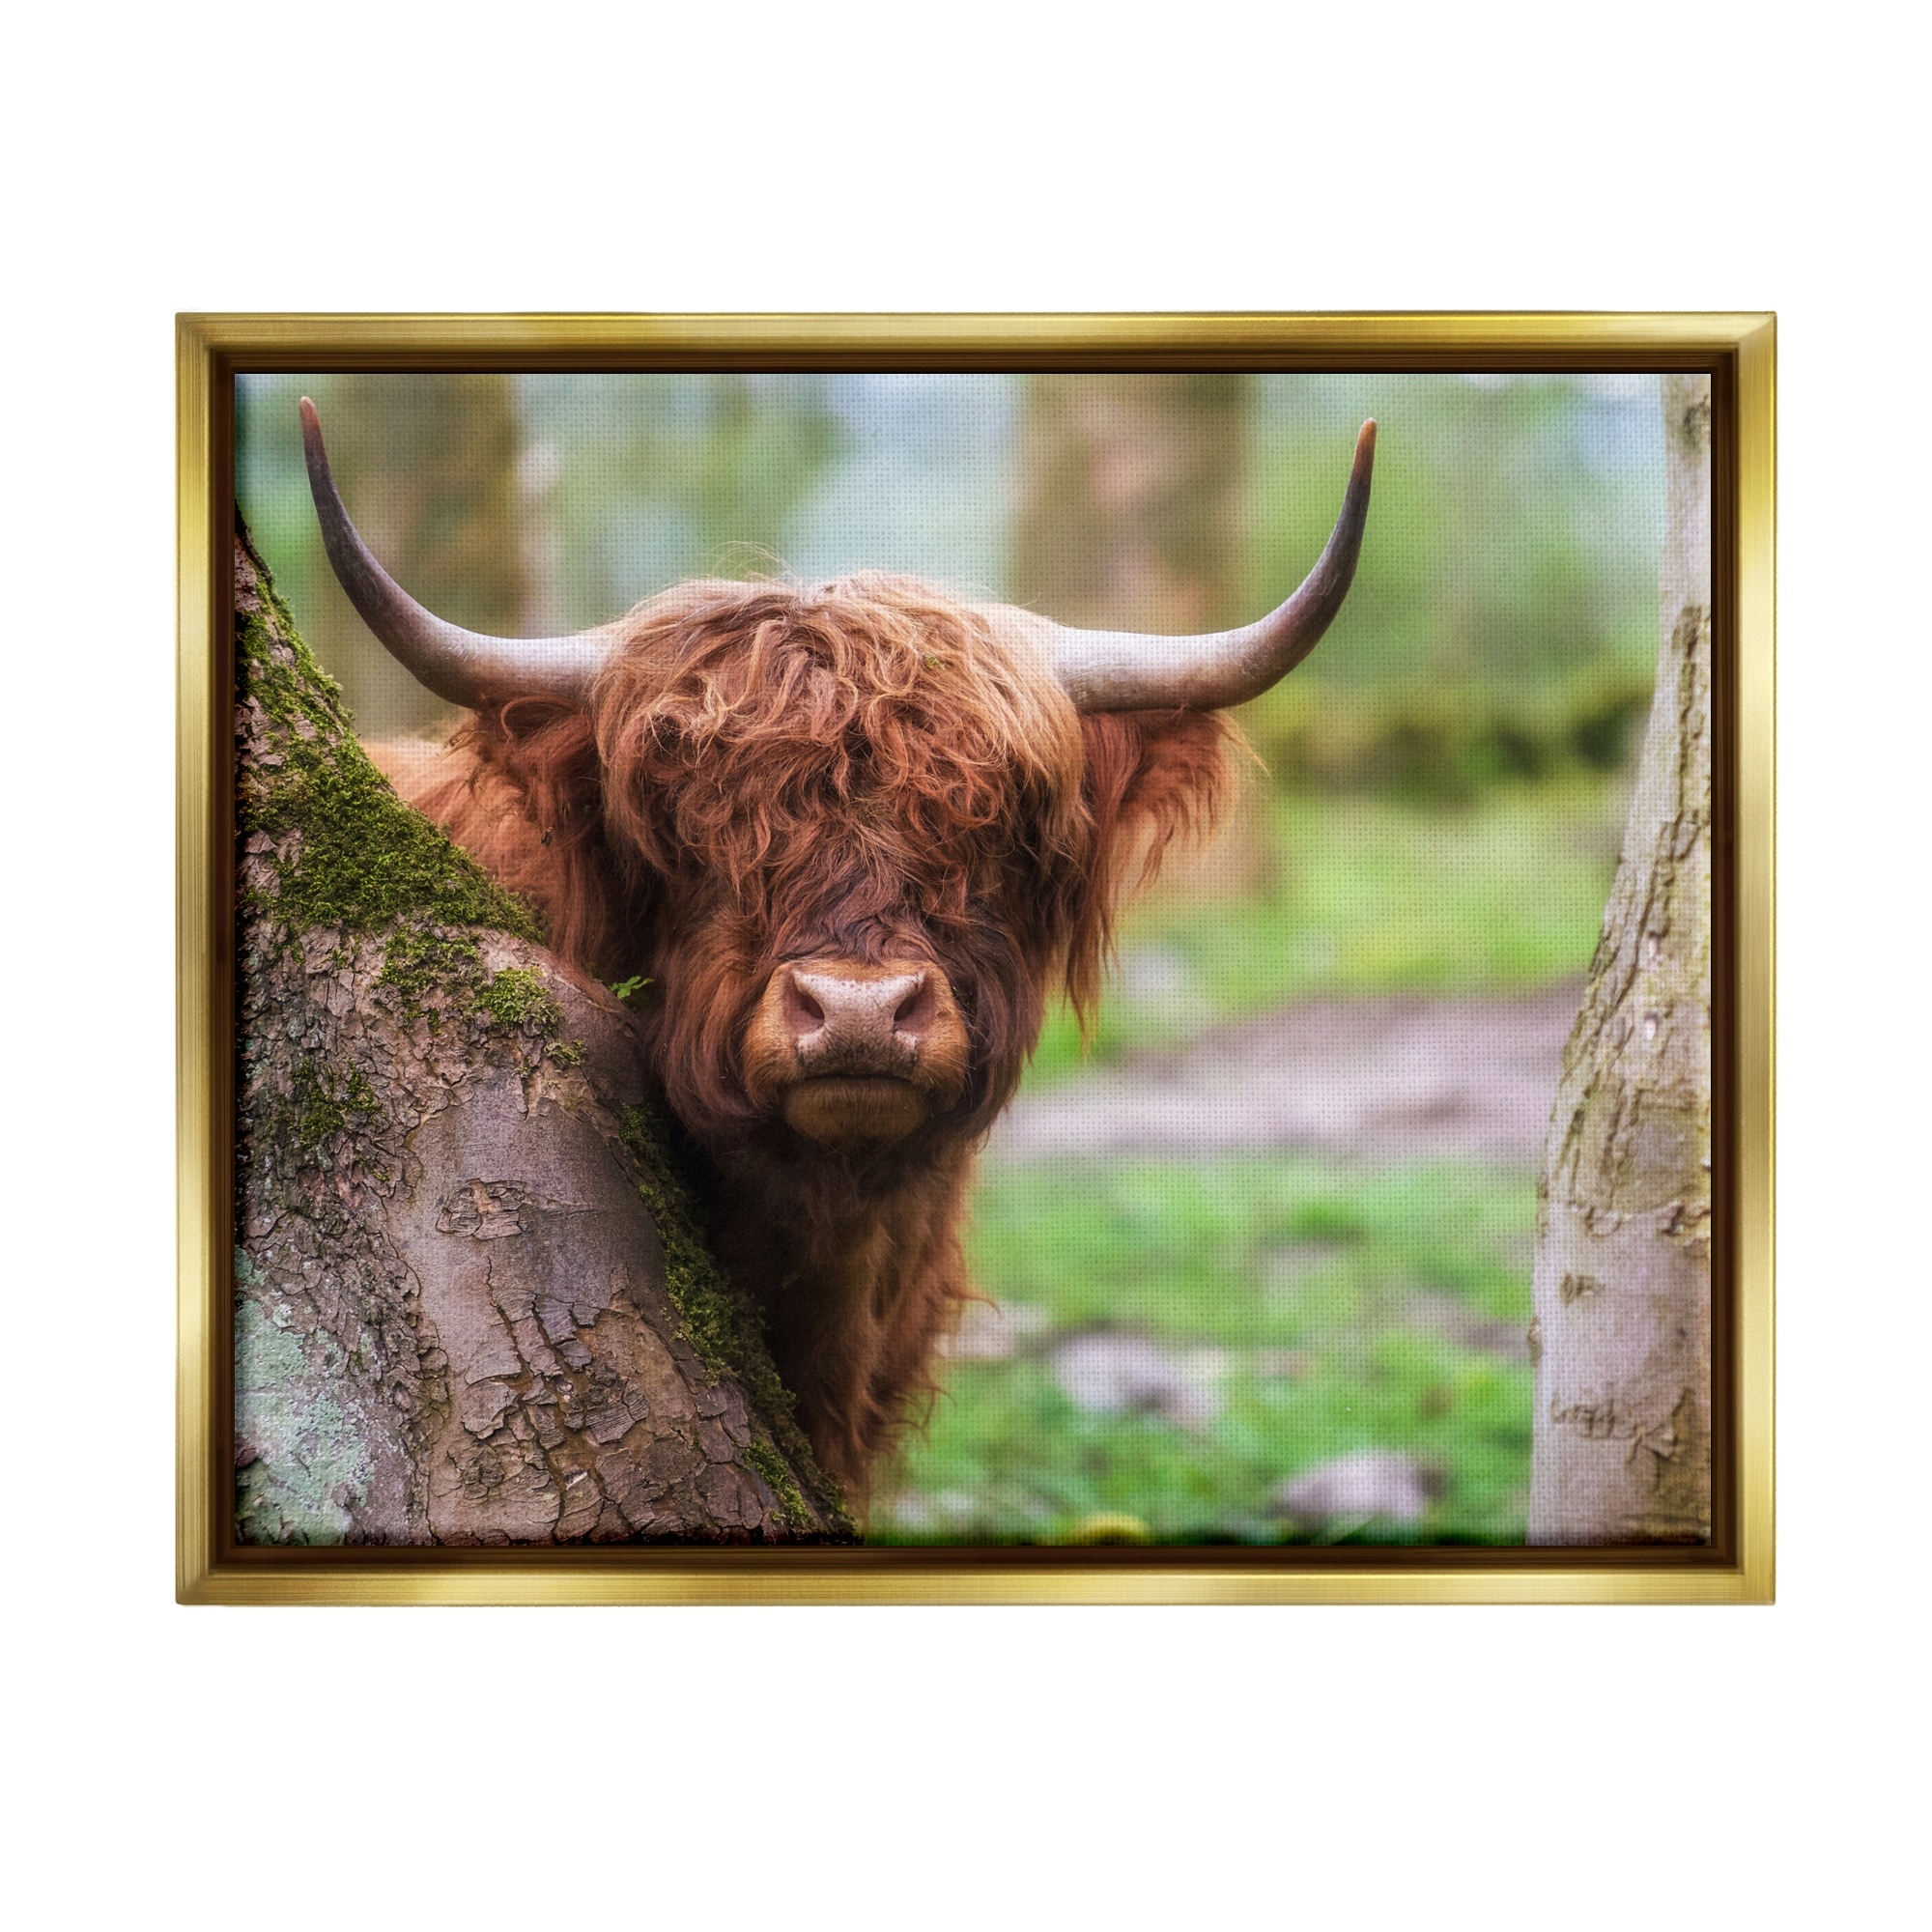 Stupell Highland Cattle Peering Between Trees Lush Nature Scene Floater  Frame, Design by James Dobson Bed Bath  Beyond 36614012